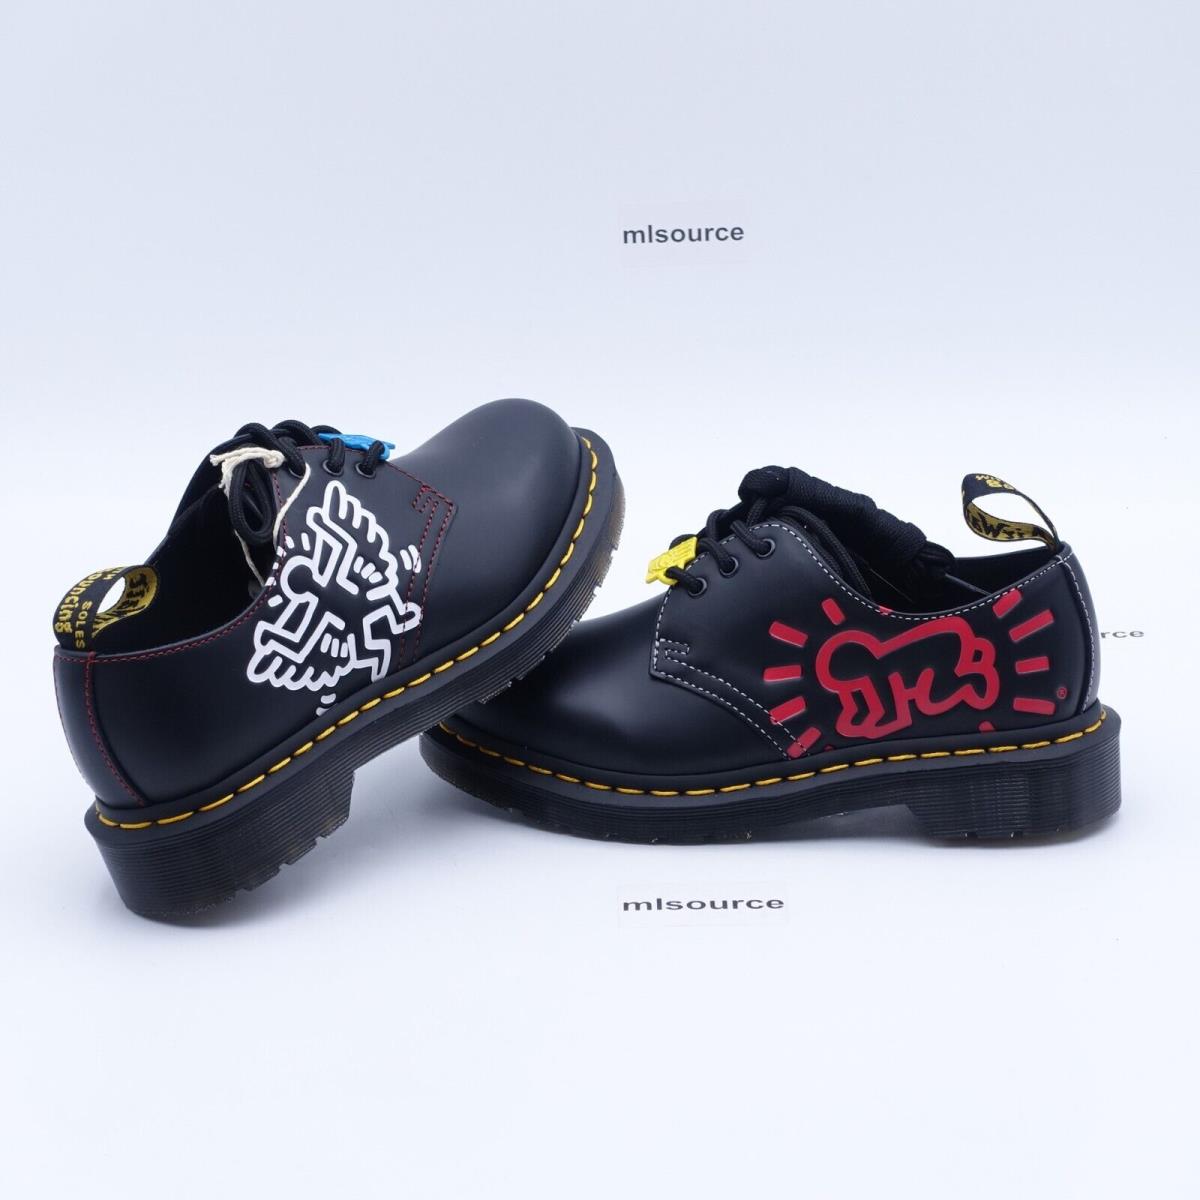 Size 5 US / UK 3 Women`s Dr. Martens Keith Haring 1461 Leather Oxford Shoes